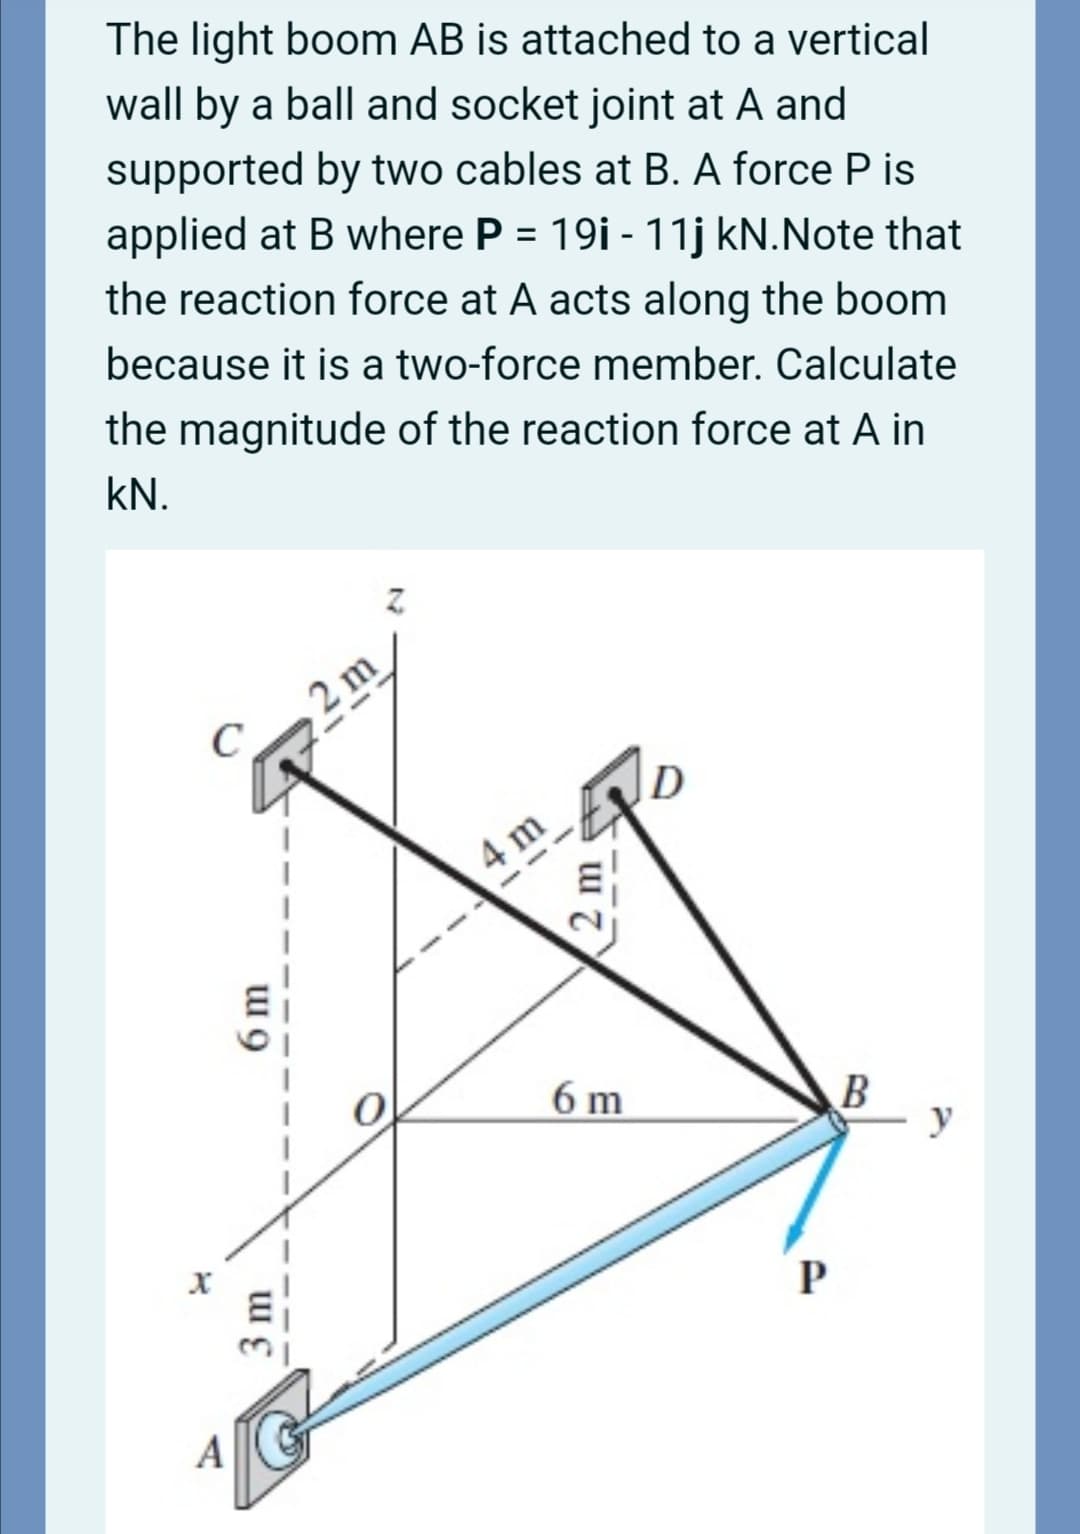 The light boom AB is attached to a vertical
wall by a ball and socket joint at A and
supported by two cables at B. A force P is
applied at B where P = 19i - 11j kN.Note that
%3D
the reaction force at A acts along the boom
because it is a two-force member. Calculate
the magnitude of the reaction force at A in
kN.
2 m
D
4 m
6 m
B
y
P
A
3 m
6 m
2 m
